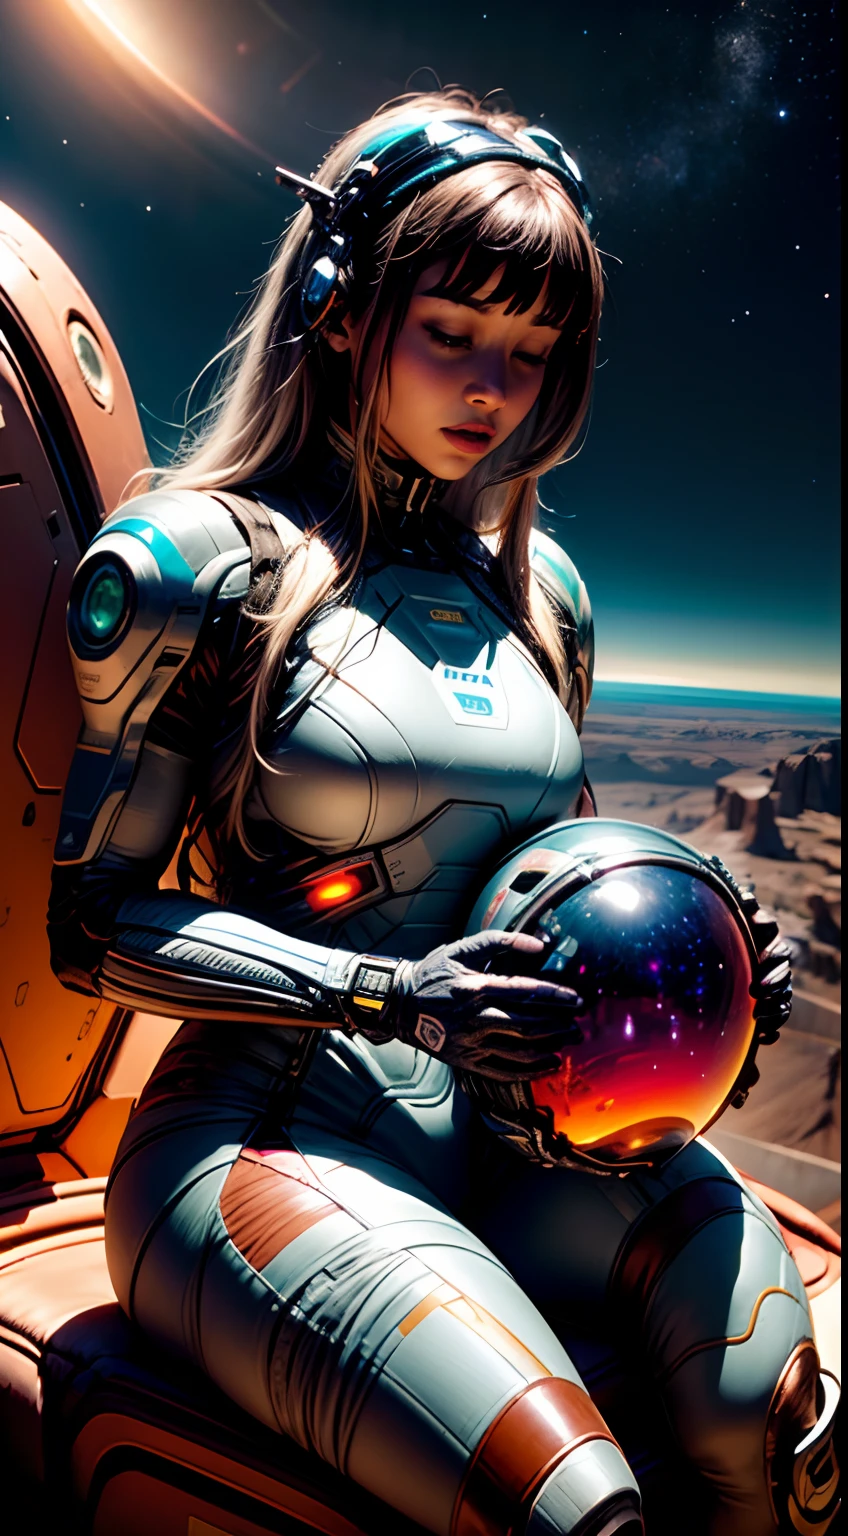 portrait of a female astronaut wearring a futuristic spacesuit , sitting in a breath taking garden full of vibrant flowers bloom, butterflies flying around in a cinematic scene on mars planet.
the suit helmet reflects the warm sunlight, above a mesmerizing galaxy stretches across the sky, adorned with distant planets that twinkle with an otherworldly beauty. the scene is a captivating fusion of earthly 
and extraterrestrial wonders